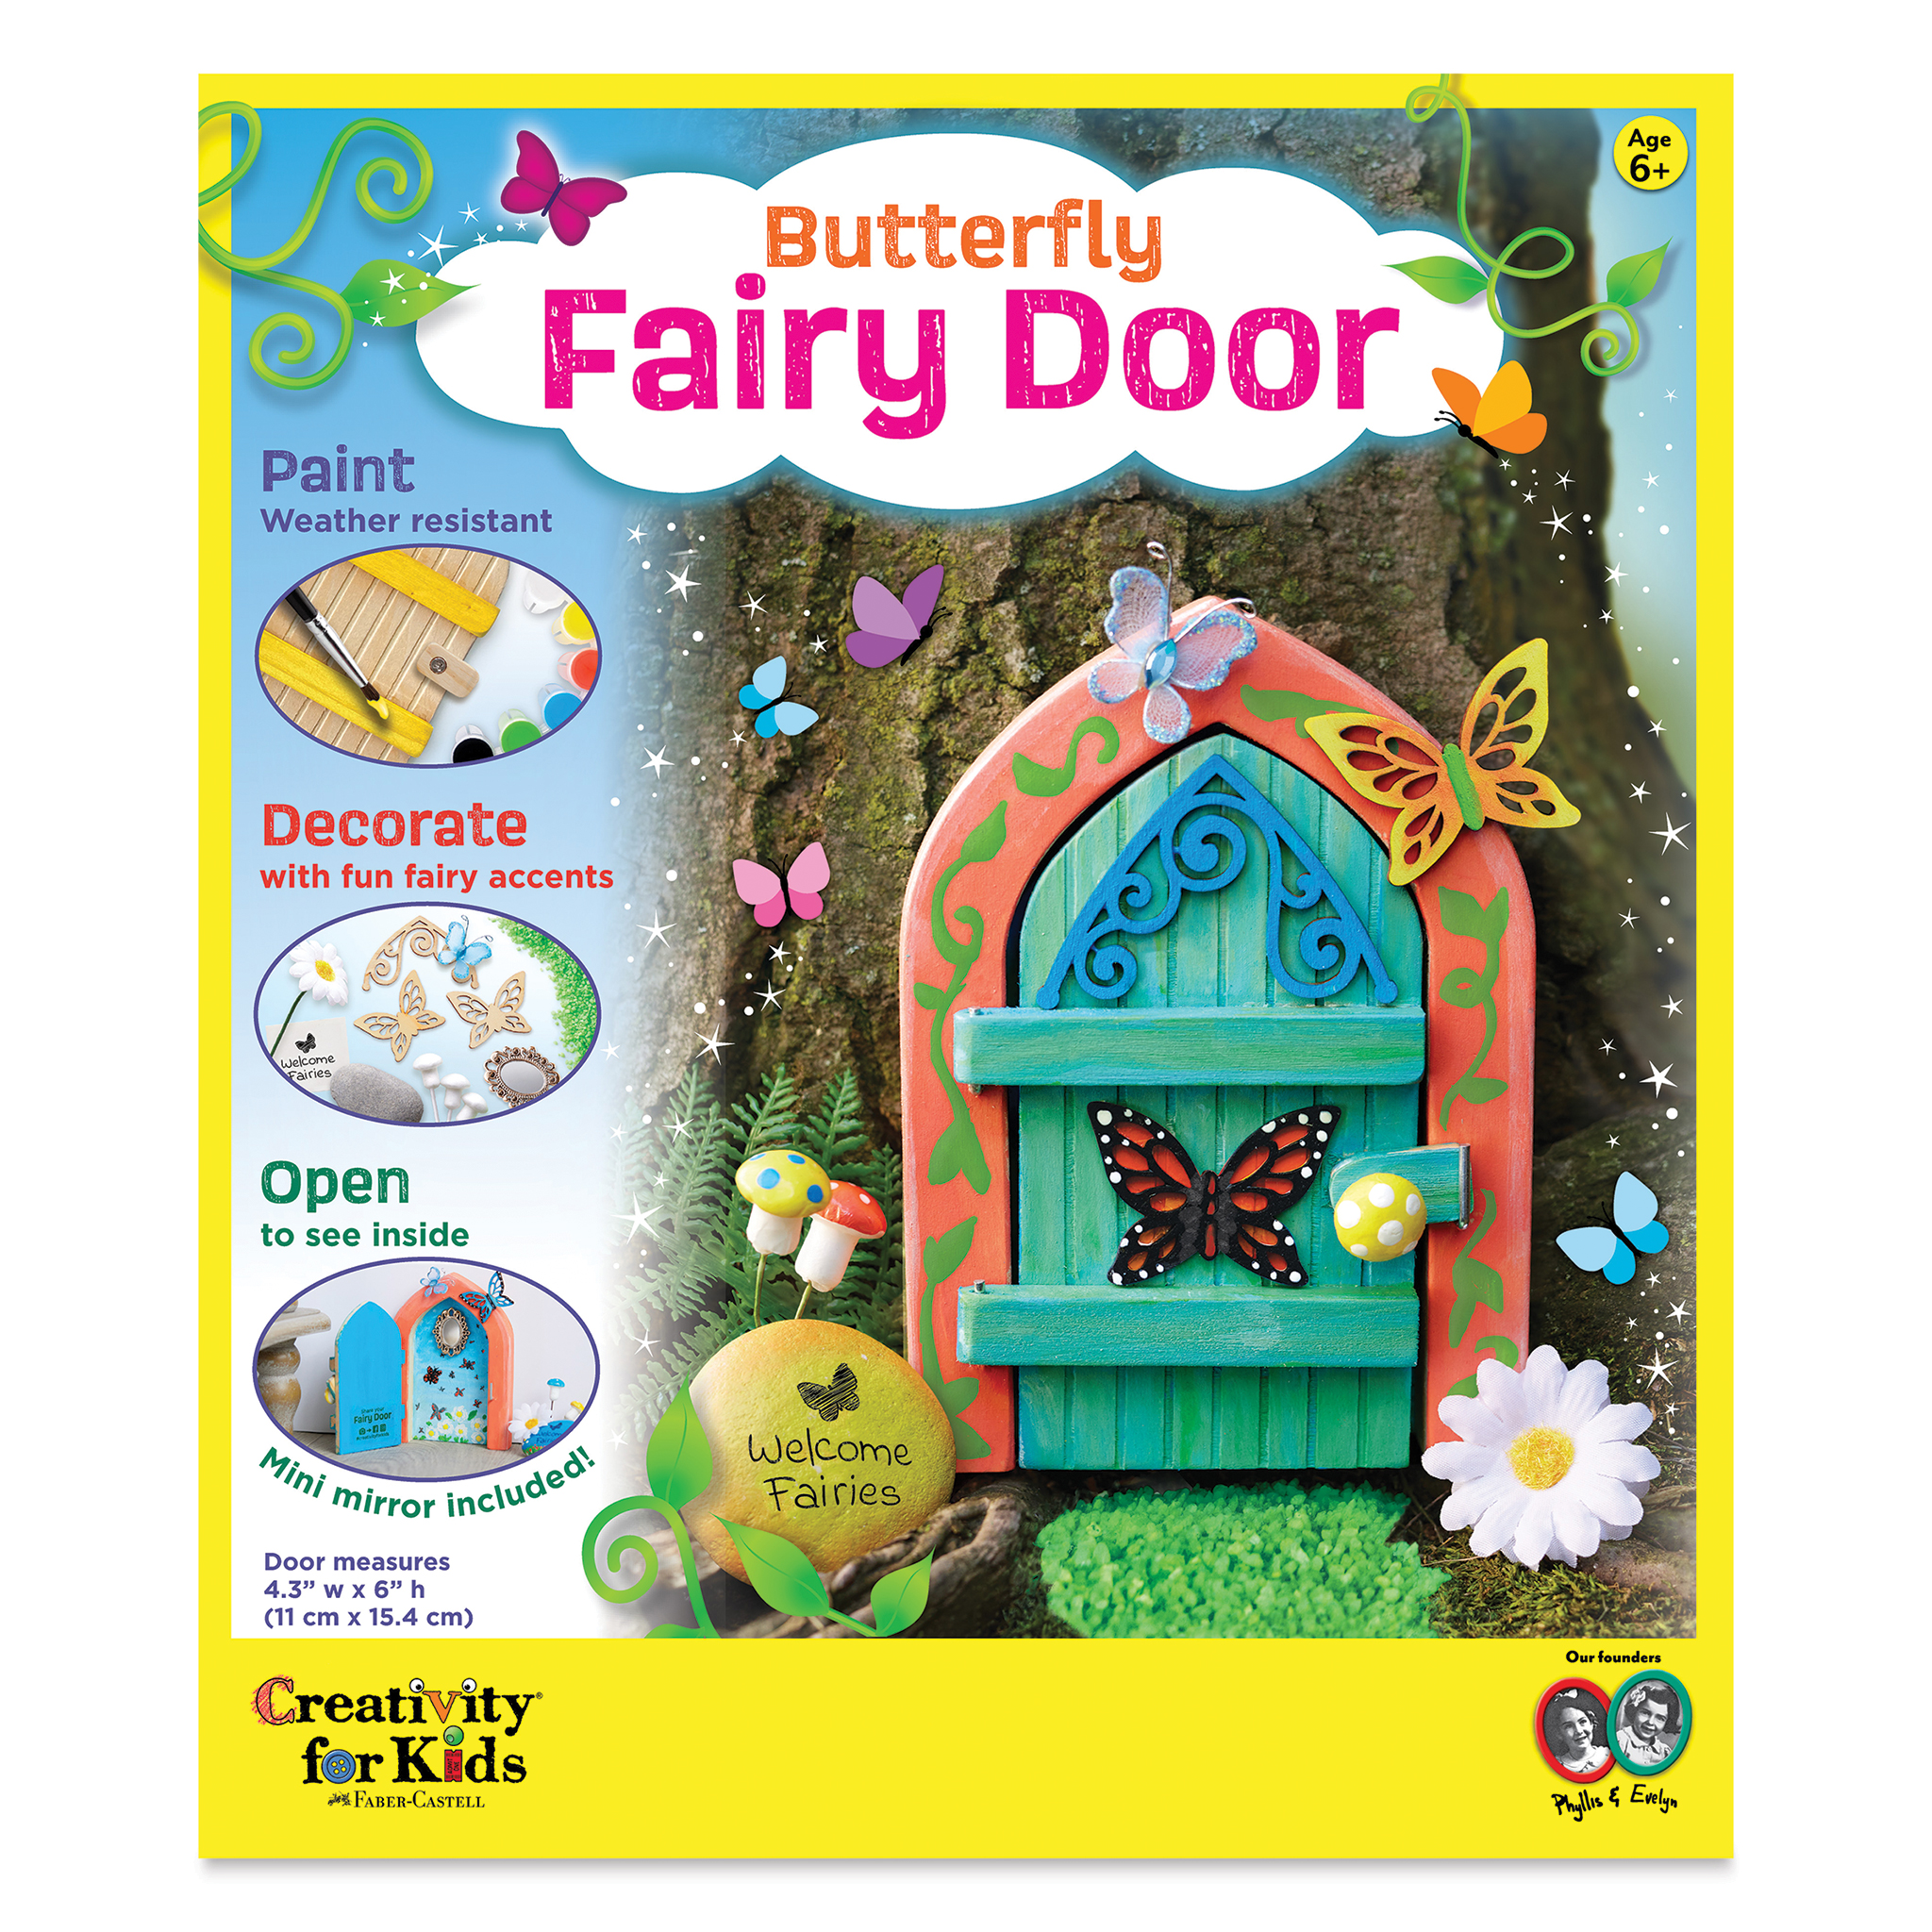 Faber-Castell creativity for kids window art fun fruits - paint and  decorate 2 suncatchers, create your own window art for kids